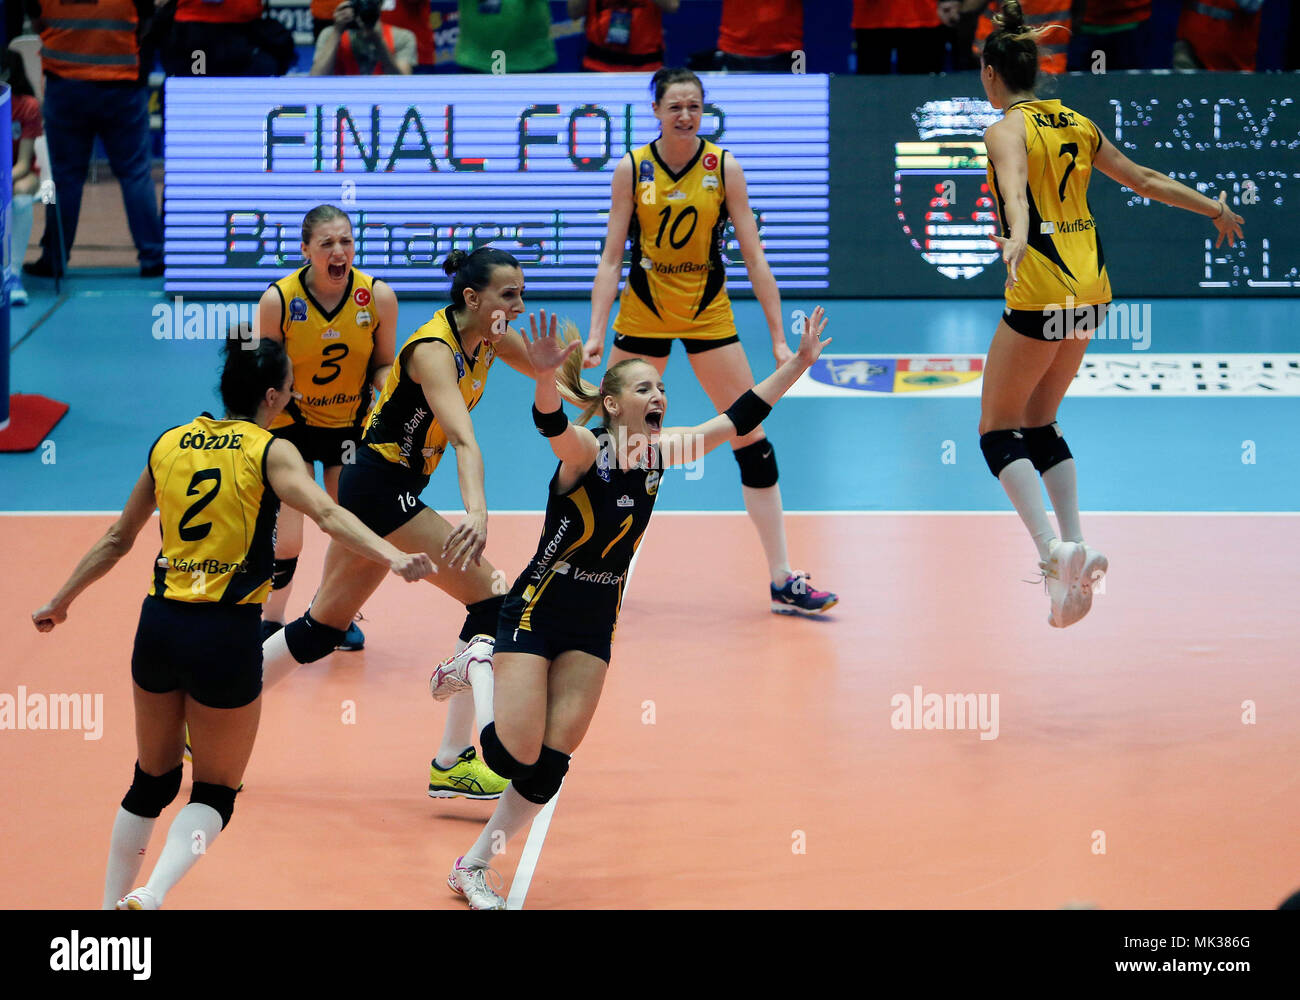 Bucharest, Romania. 6th May, 2018. Players of Turkey's Vakifbank celebrate  during the 2018 CEV Volleyball Champions League final against Romania's CSM  Volei Alba Blaj in Bucharest, Romania, May 6, 2018. Vakifbank Istanbul